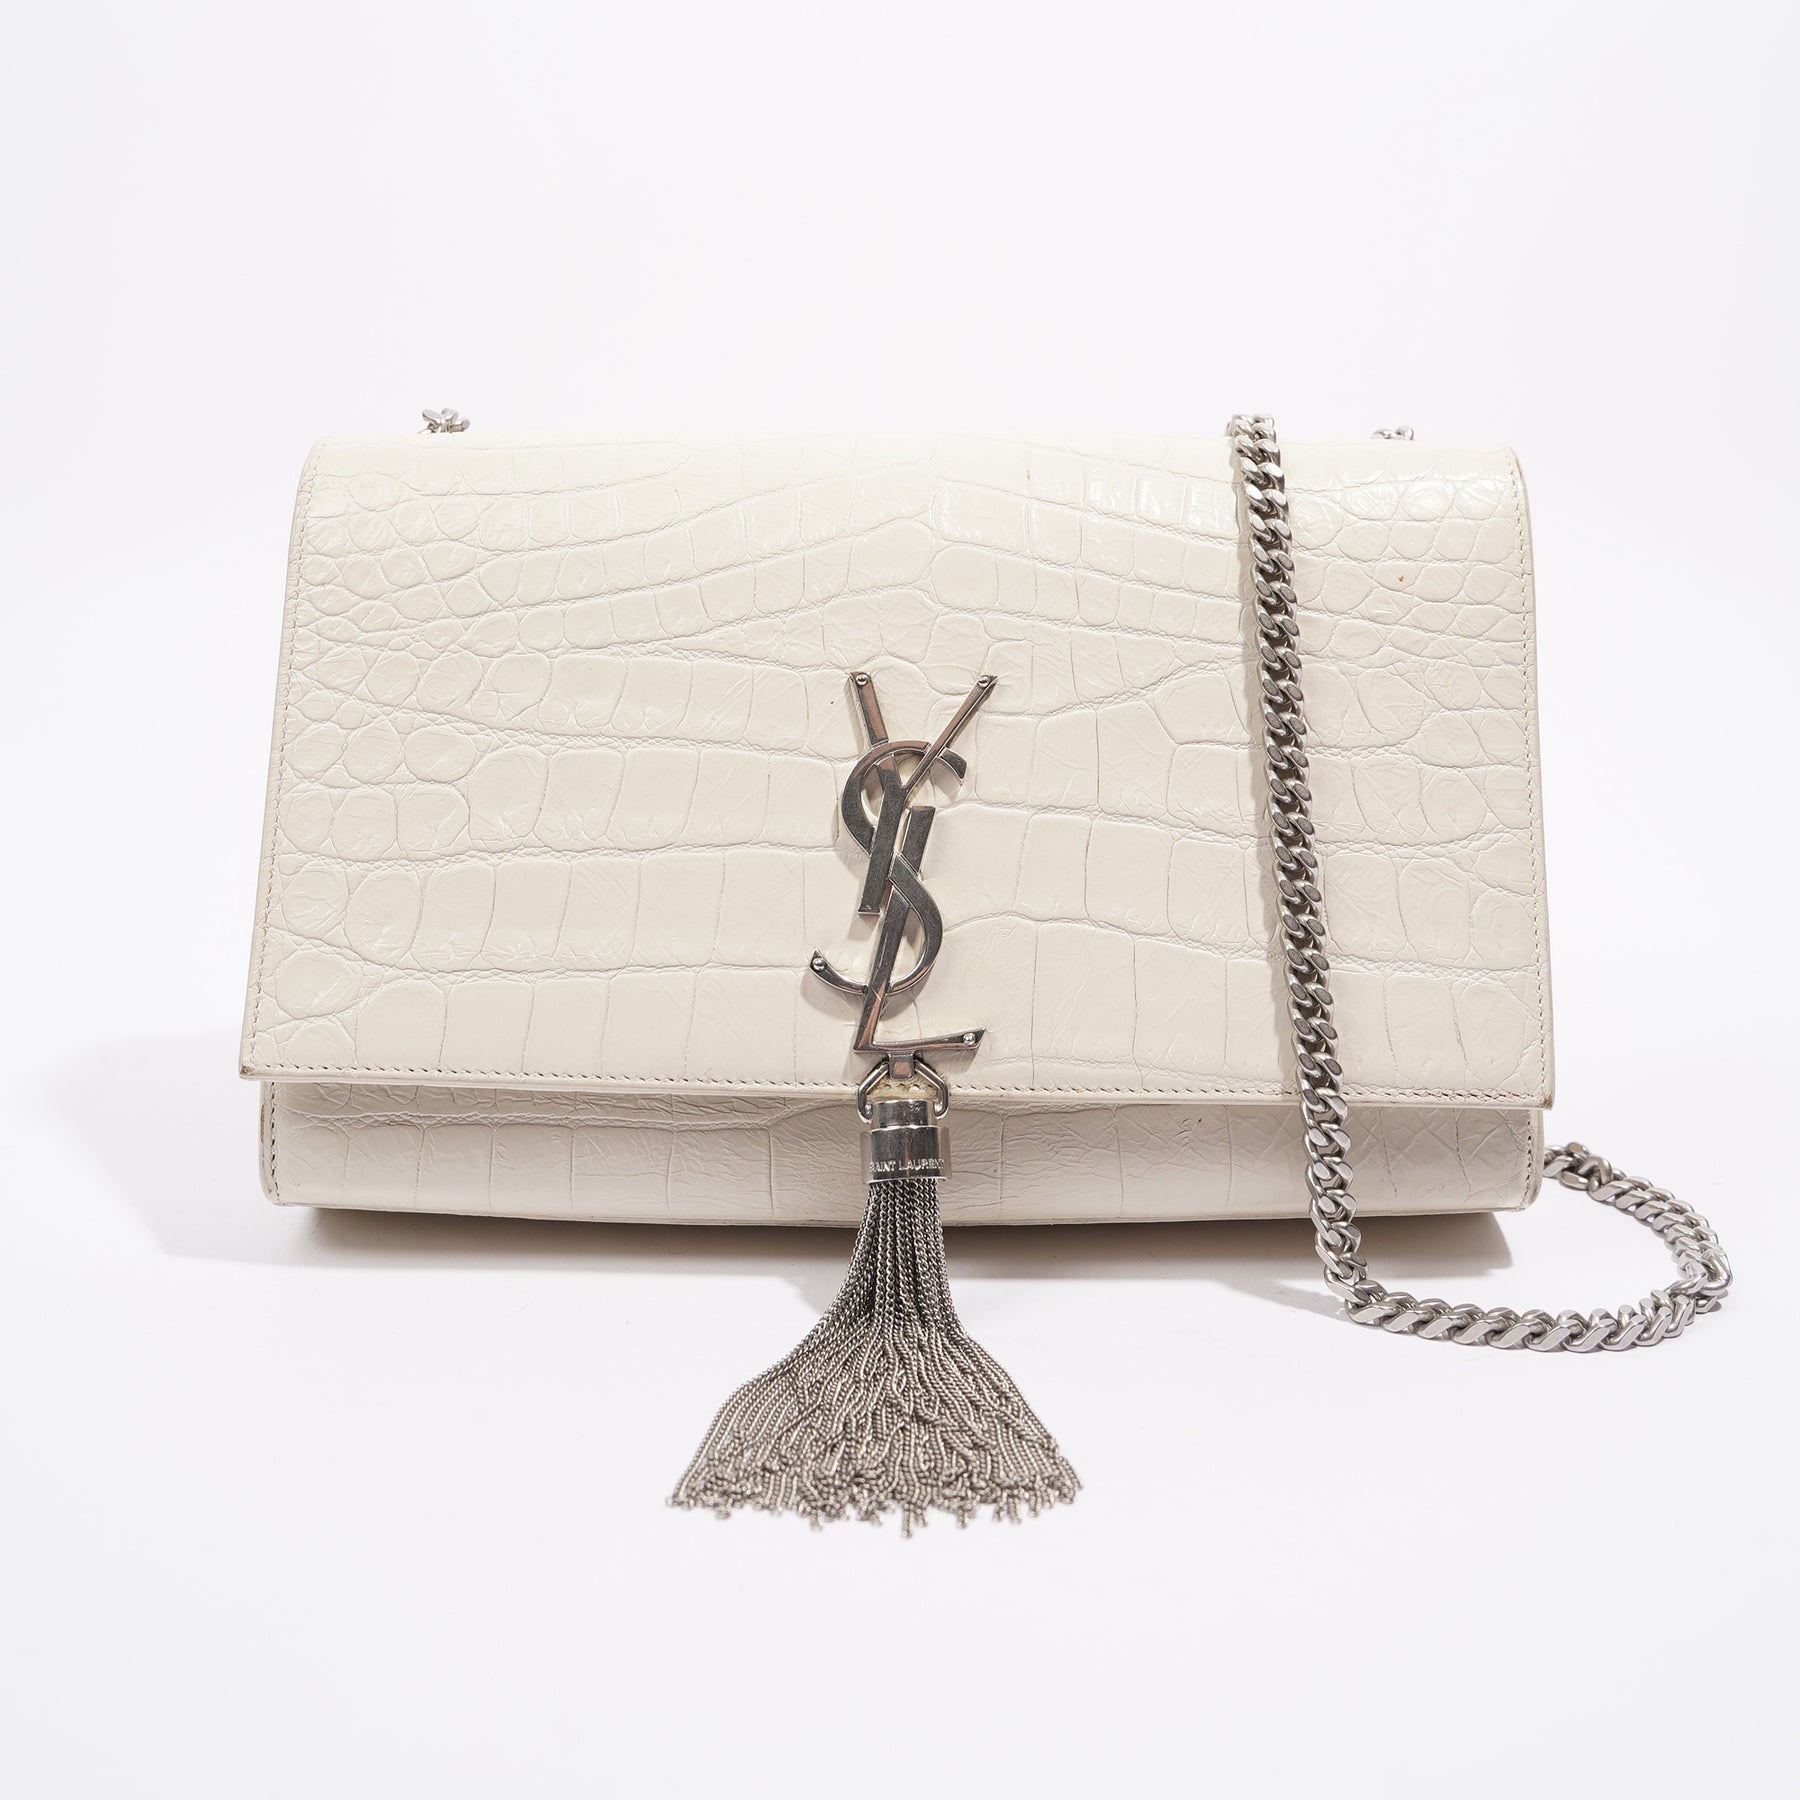 Saint Laurent Ysl New Small Kate Mirror Bag In Silver